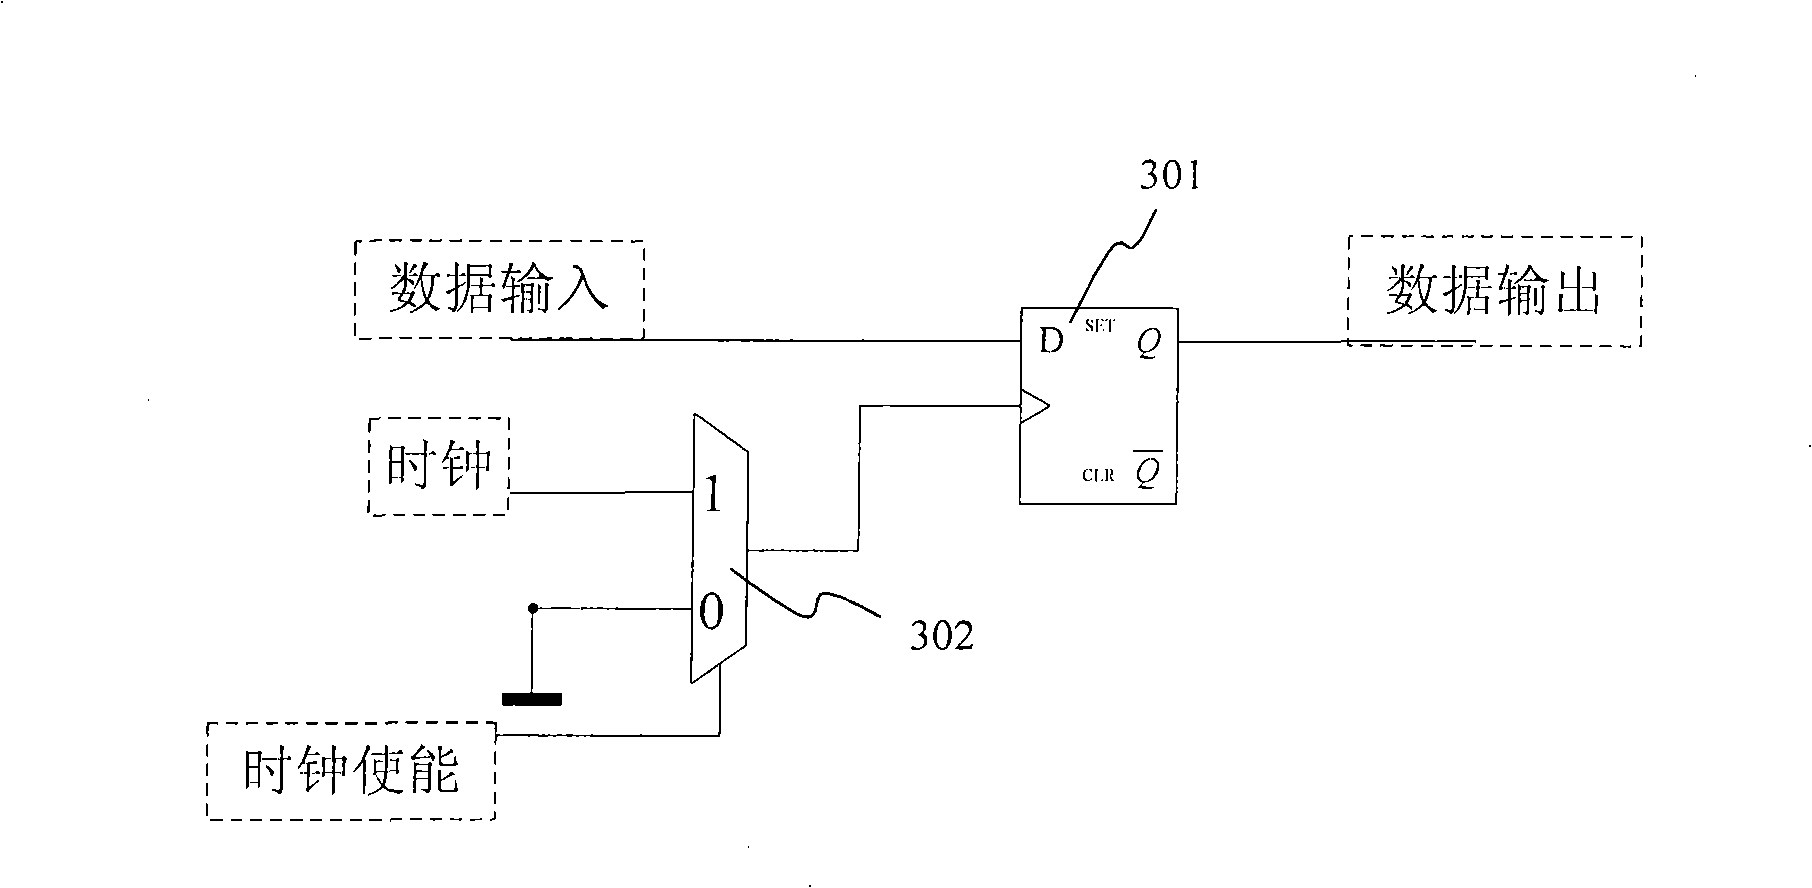 Gating clock for on-site programmable gate array and implementing method thereof